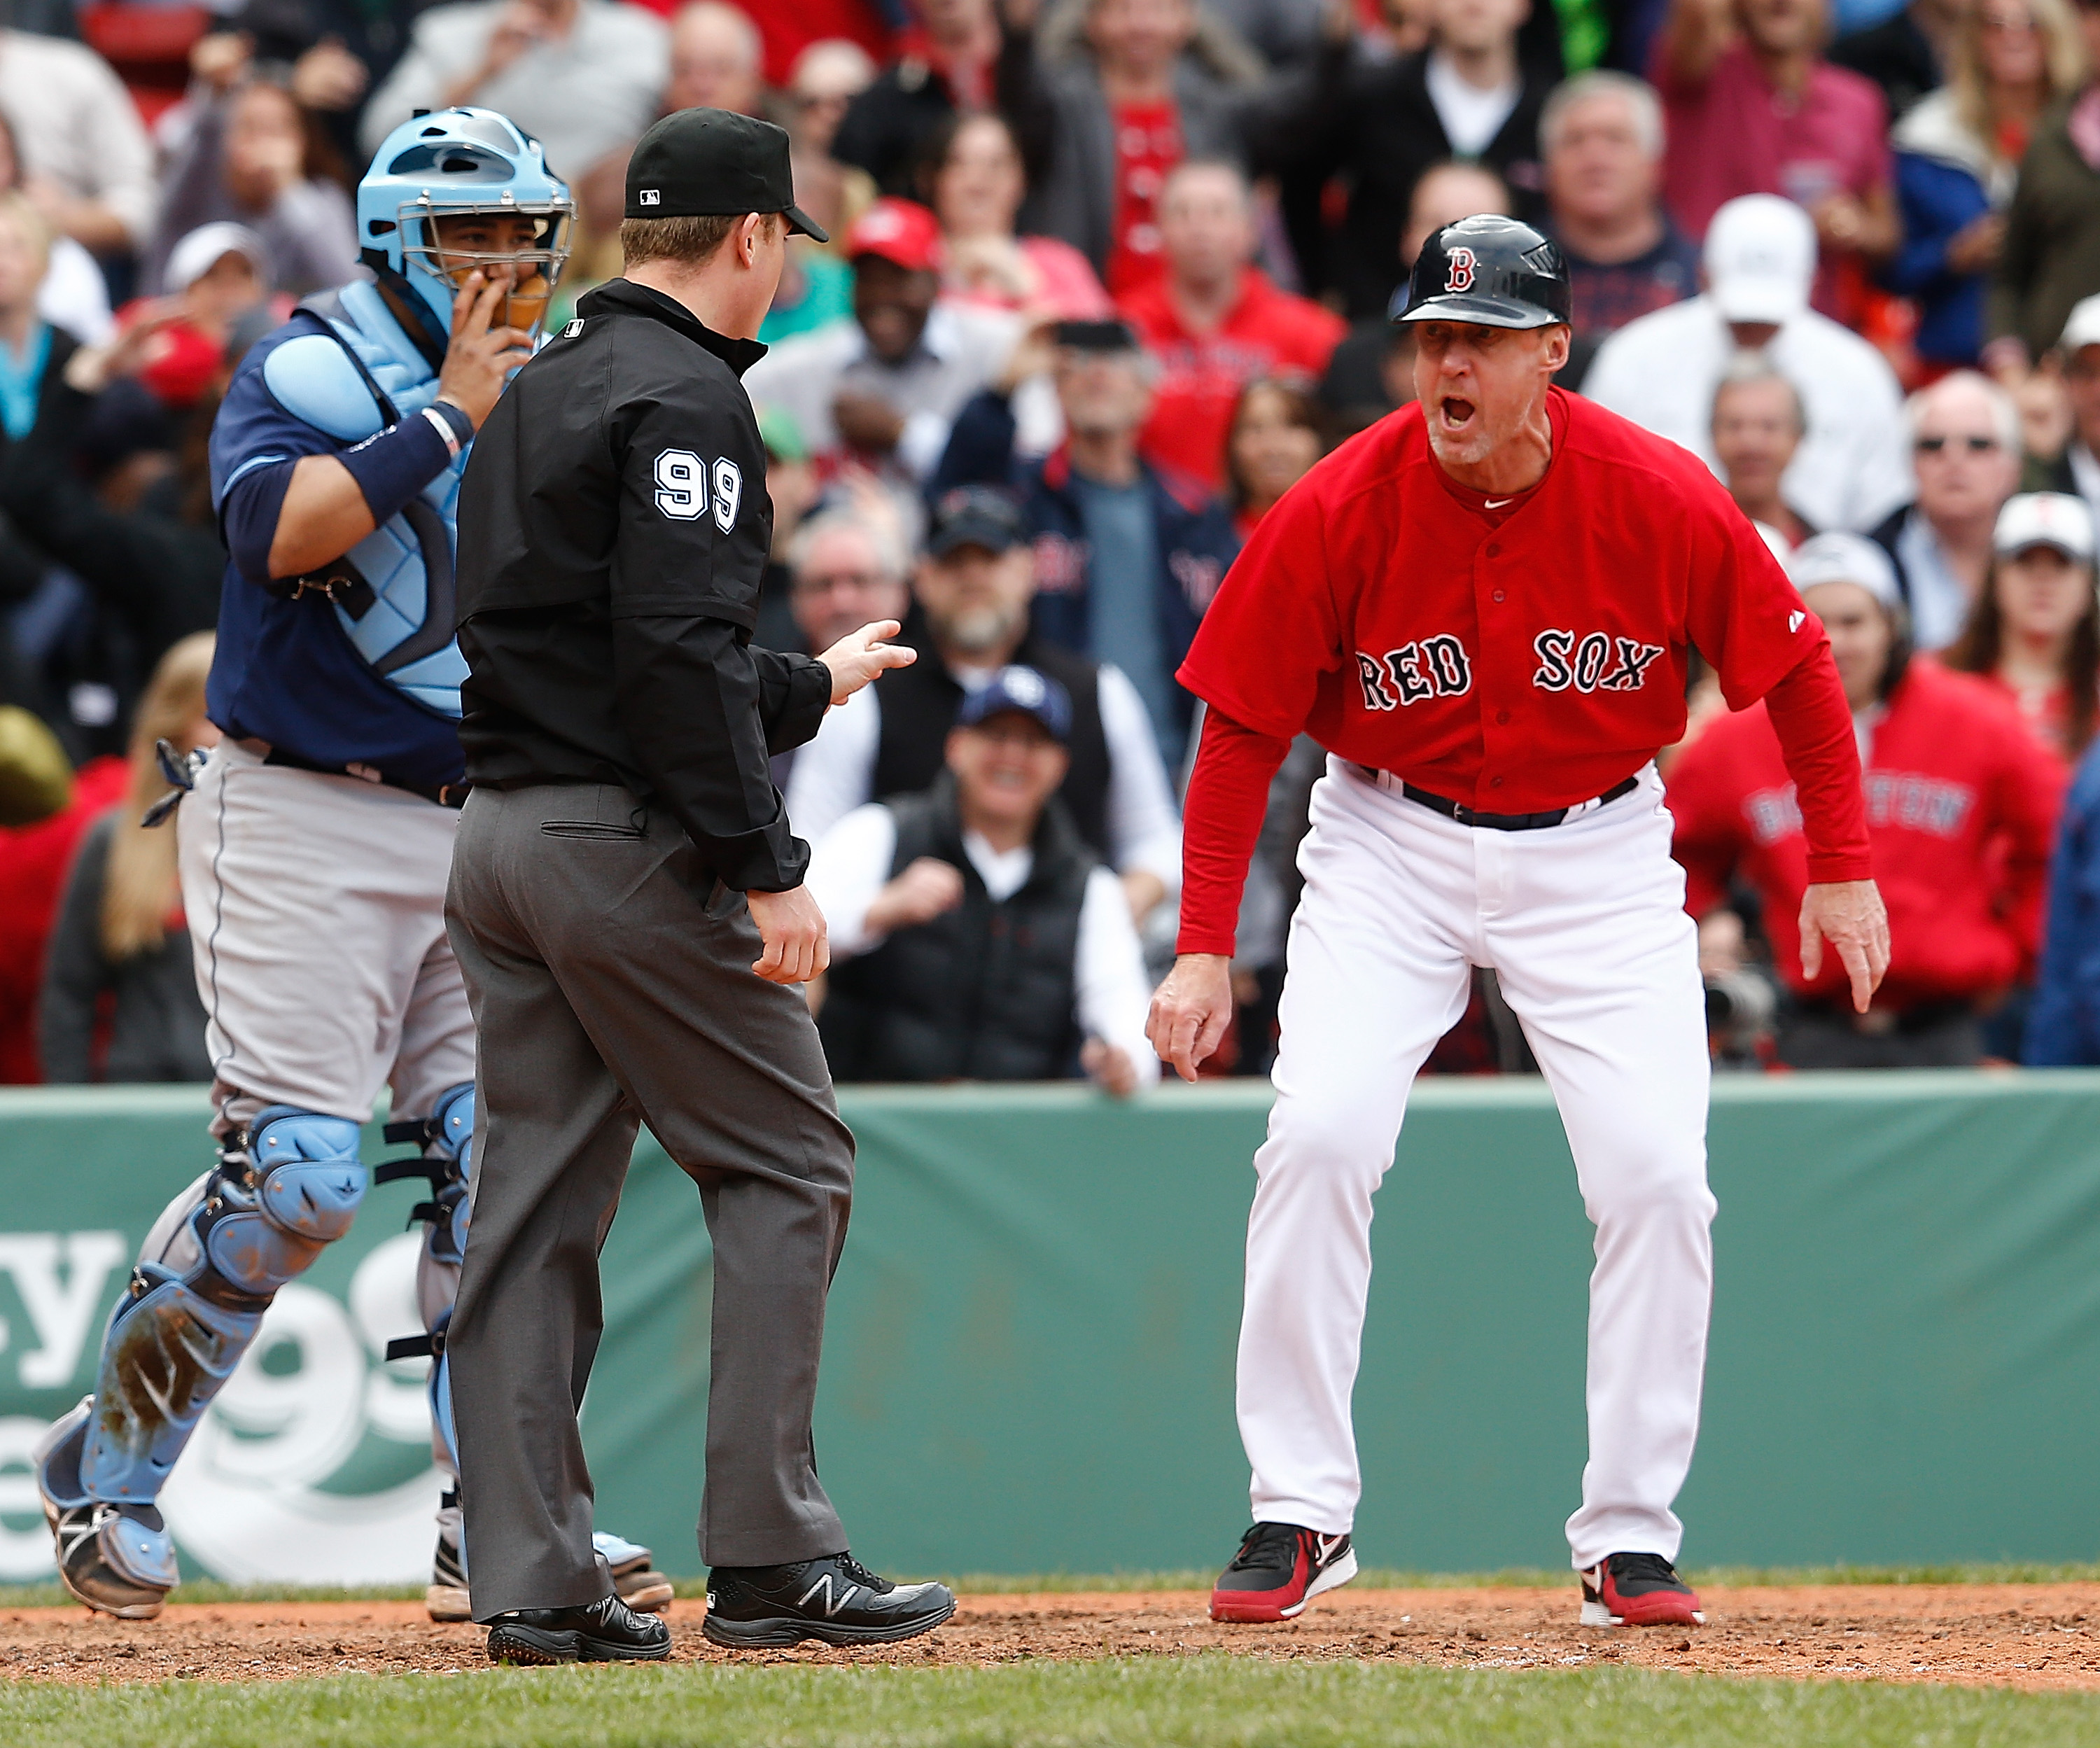 Red Sox third base coach Brian Butterfield reacts after umpire Toby Basner called Dustin Pedroia out on a play at home plate against the Tampa Bay Rays. Butterfield was later ejected from the game. (Photo by Jim Rogash/Getty Images)